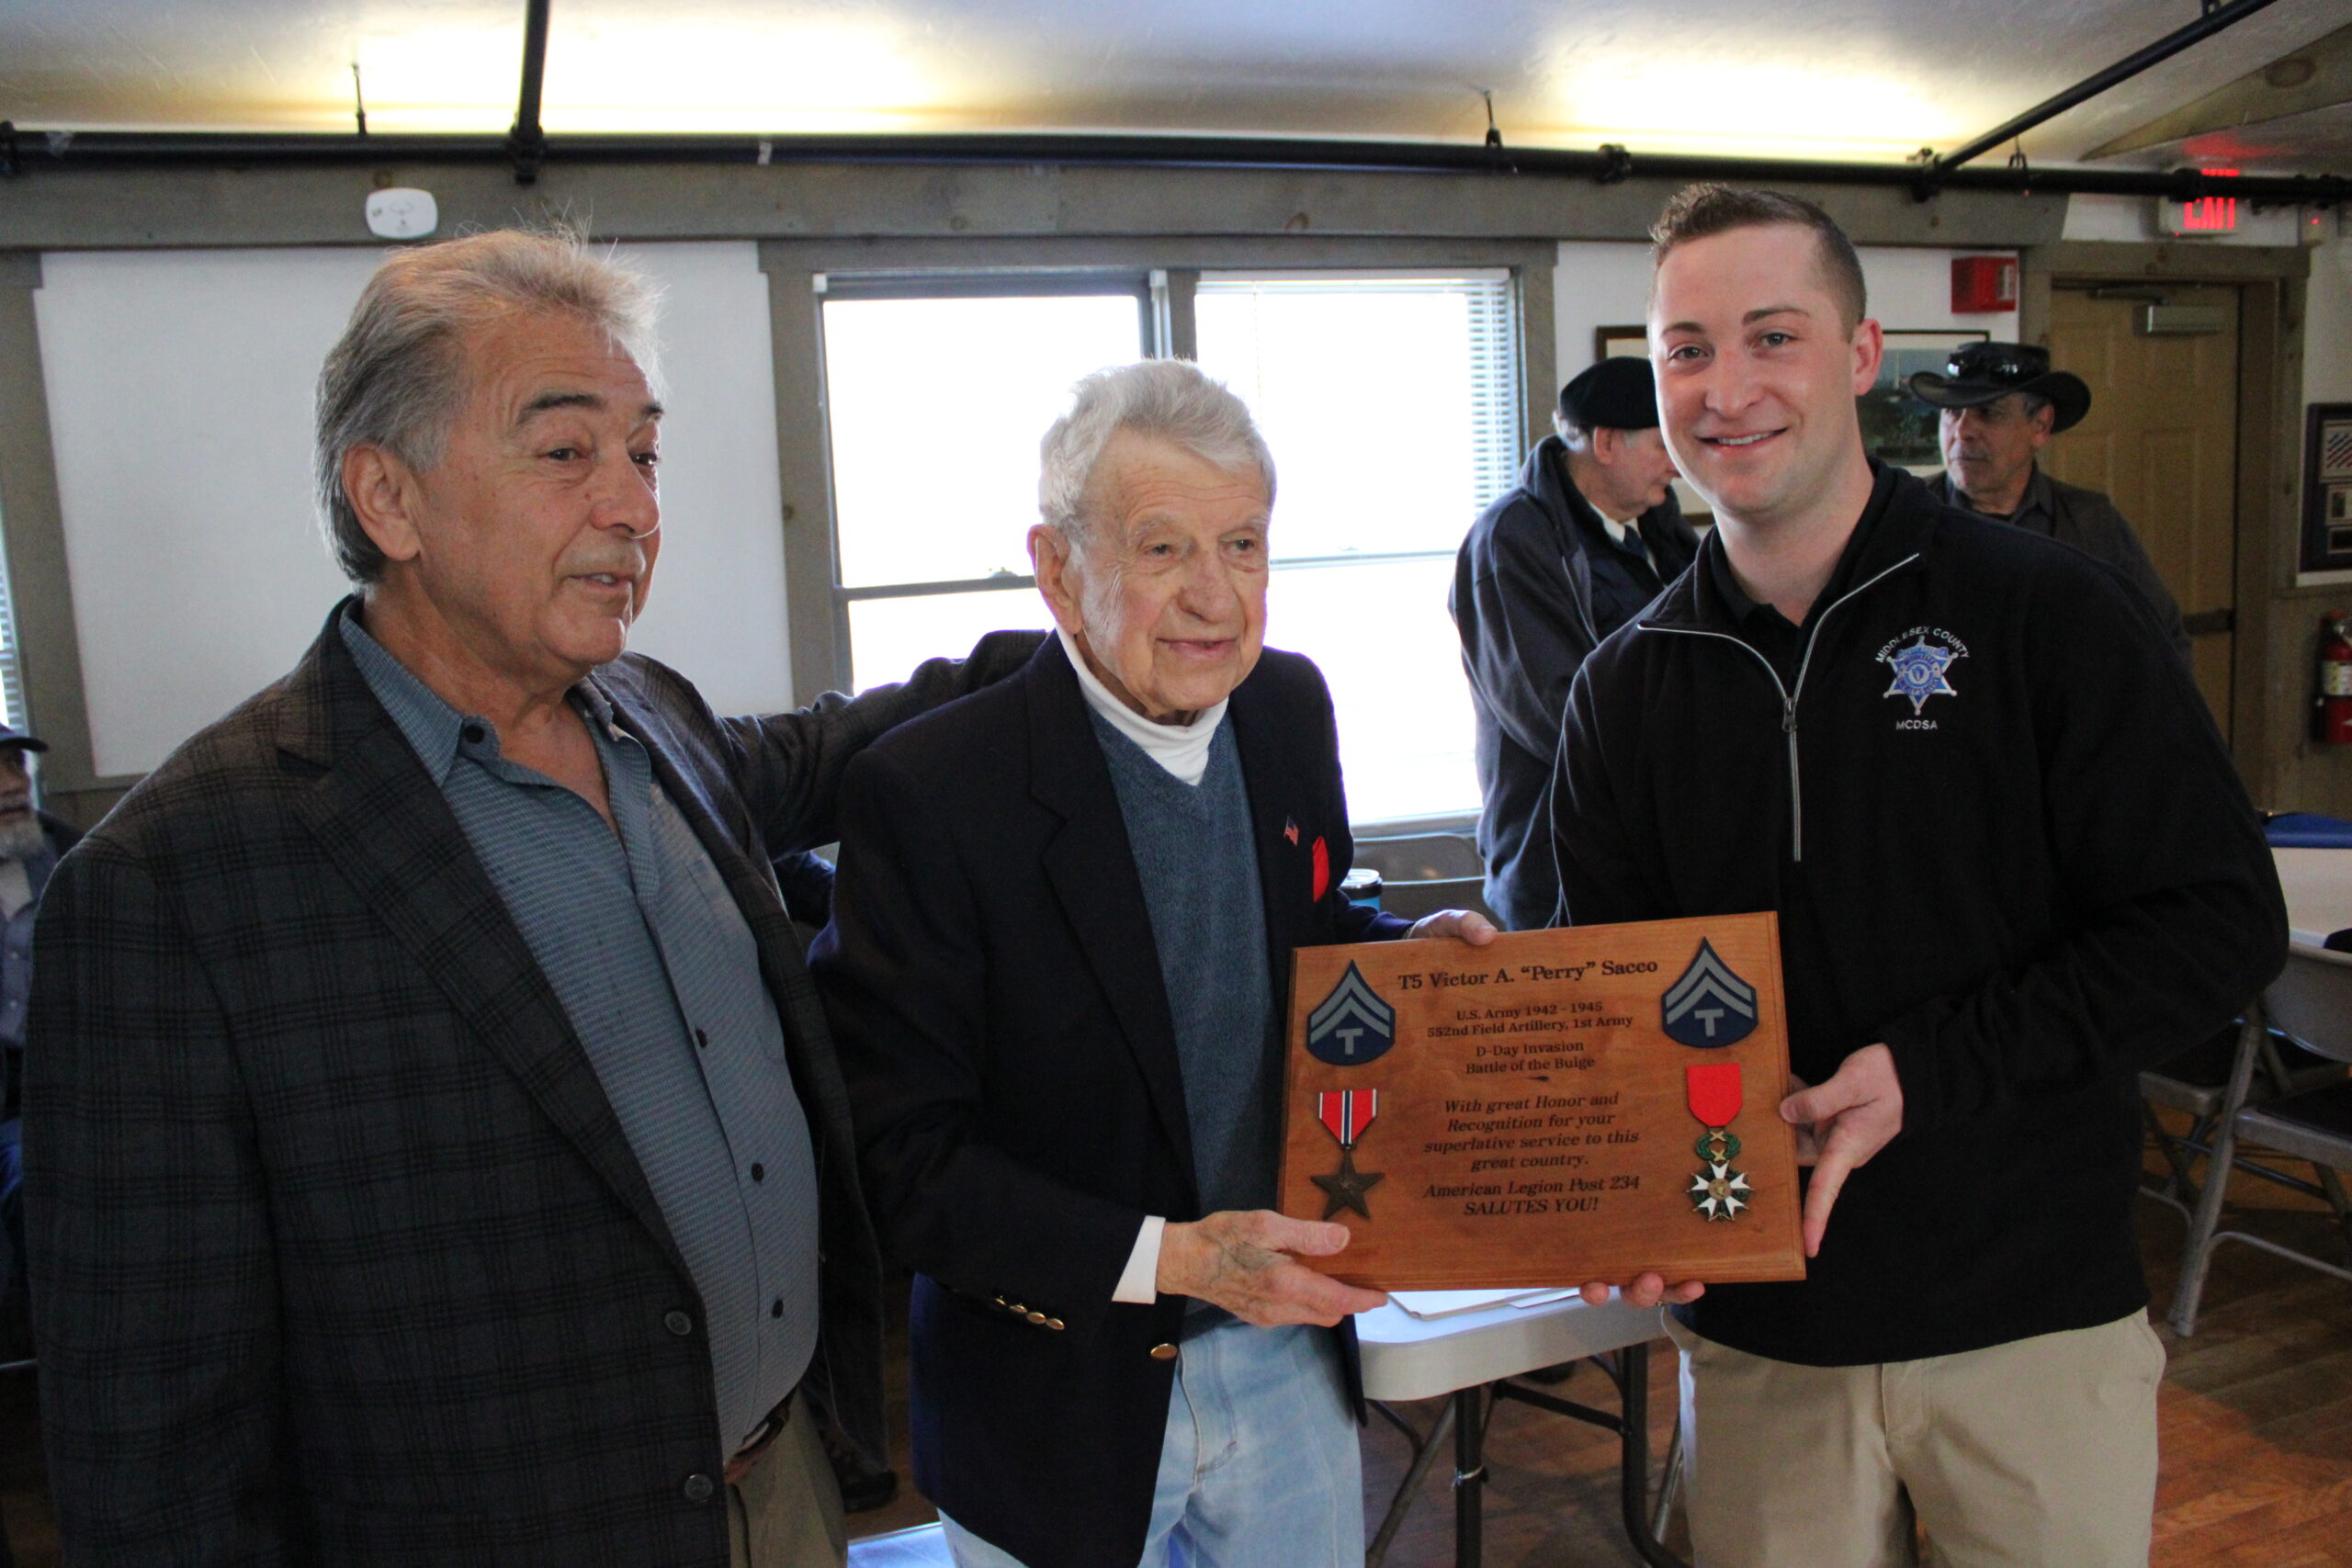 Victor A. “Perry” Sacco, center, receives a plaque commemorating his service in WWII during a ceremony at the American Legion Vincent F. Picard Post 234 on April 2. Flanking him are former post commander Roger Langevin, left, and the post’s vice commander, Spencer Jacobs. Photo/Maureen Sullivan